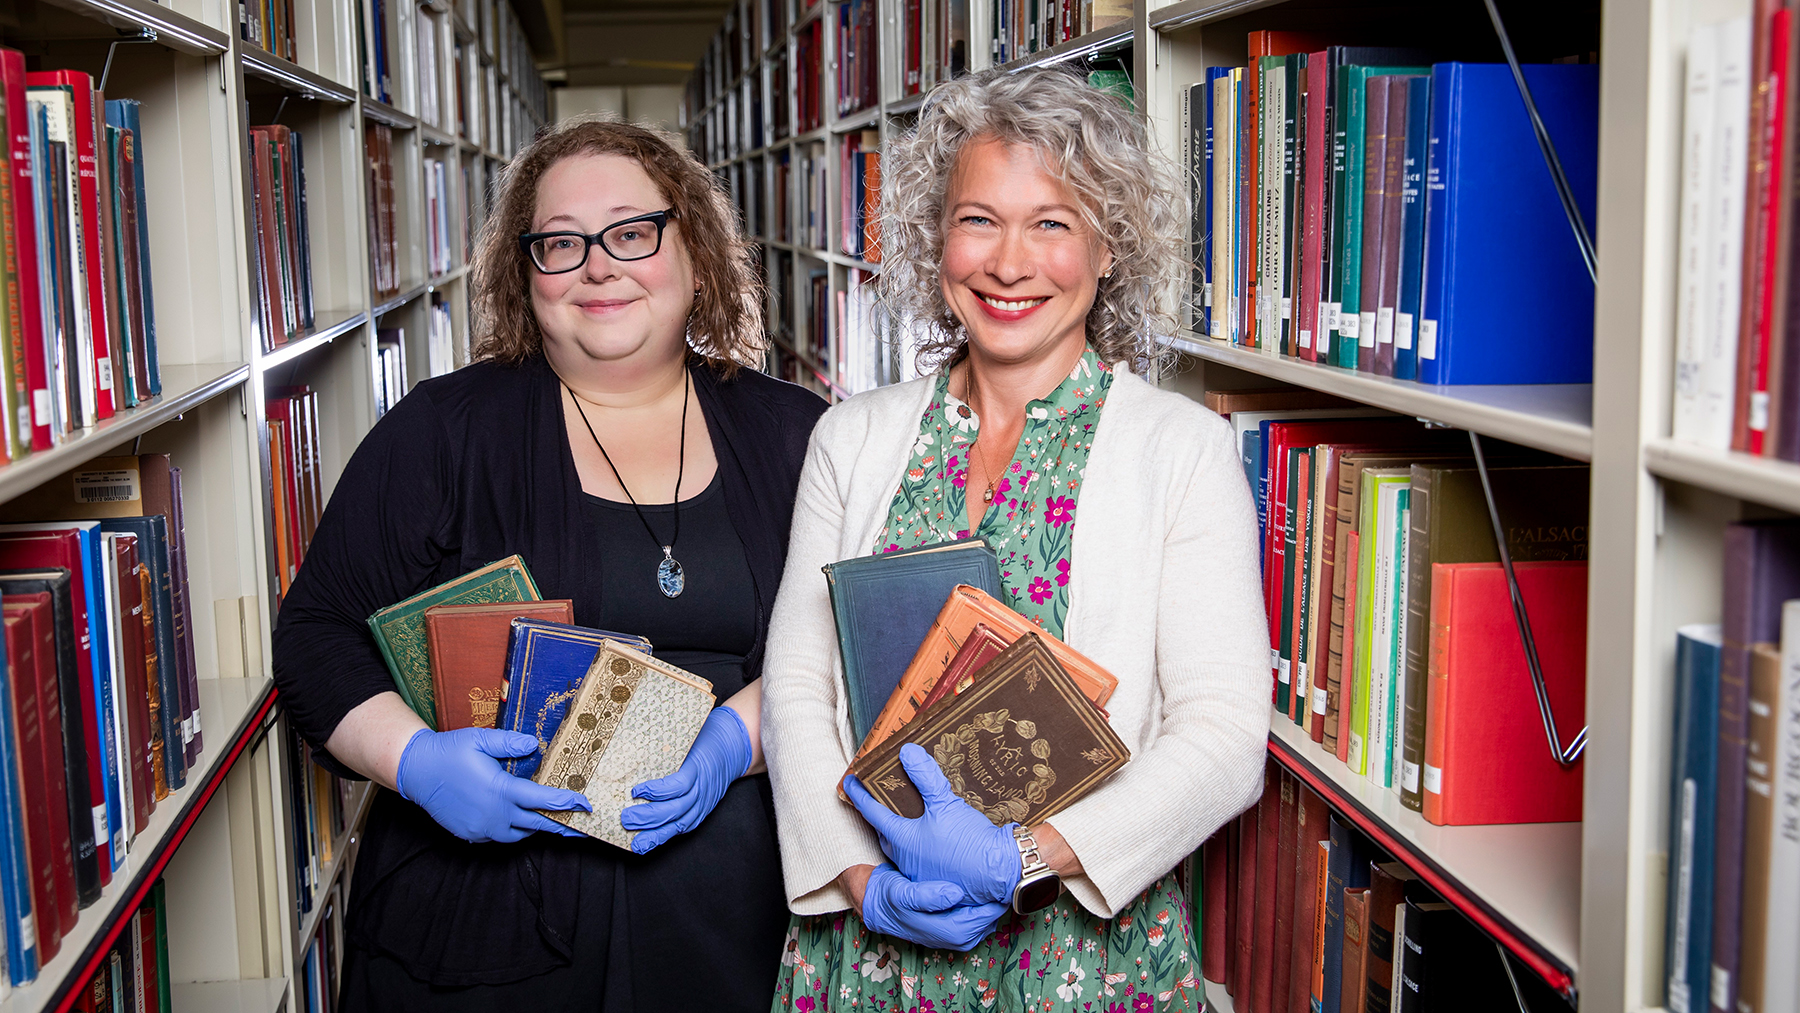 Shelby Strommer, the collections care coordinator for Preservation Services, and Jennifer Hain Teper, the head of Preservation Services for the University Library, hold Victorian-era books. Photo by Michelle Hassel